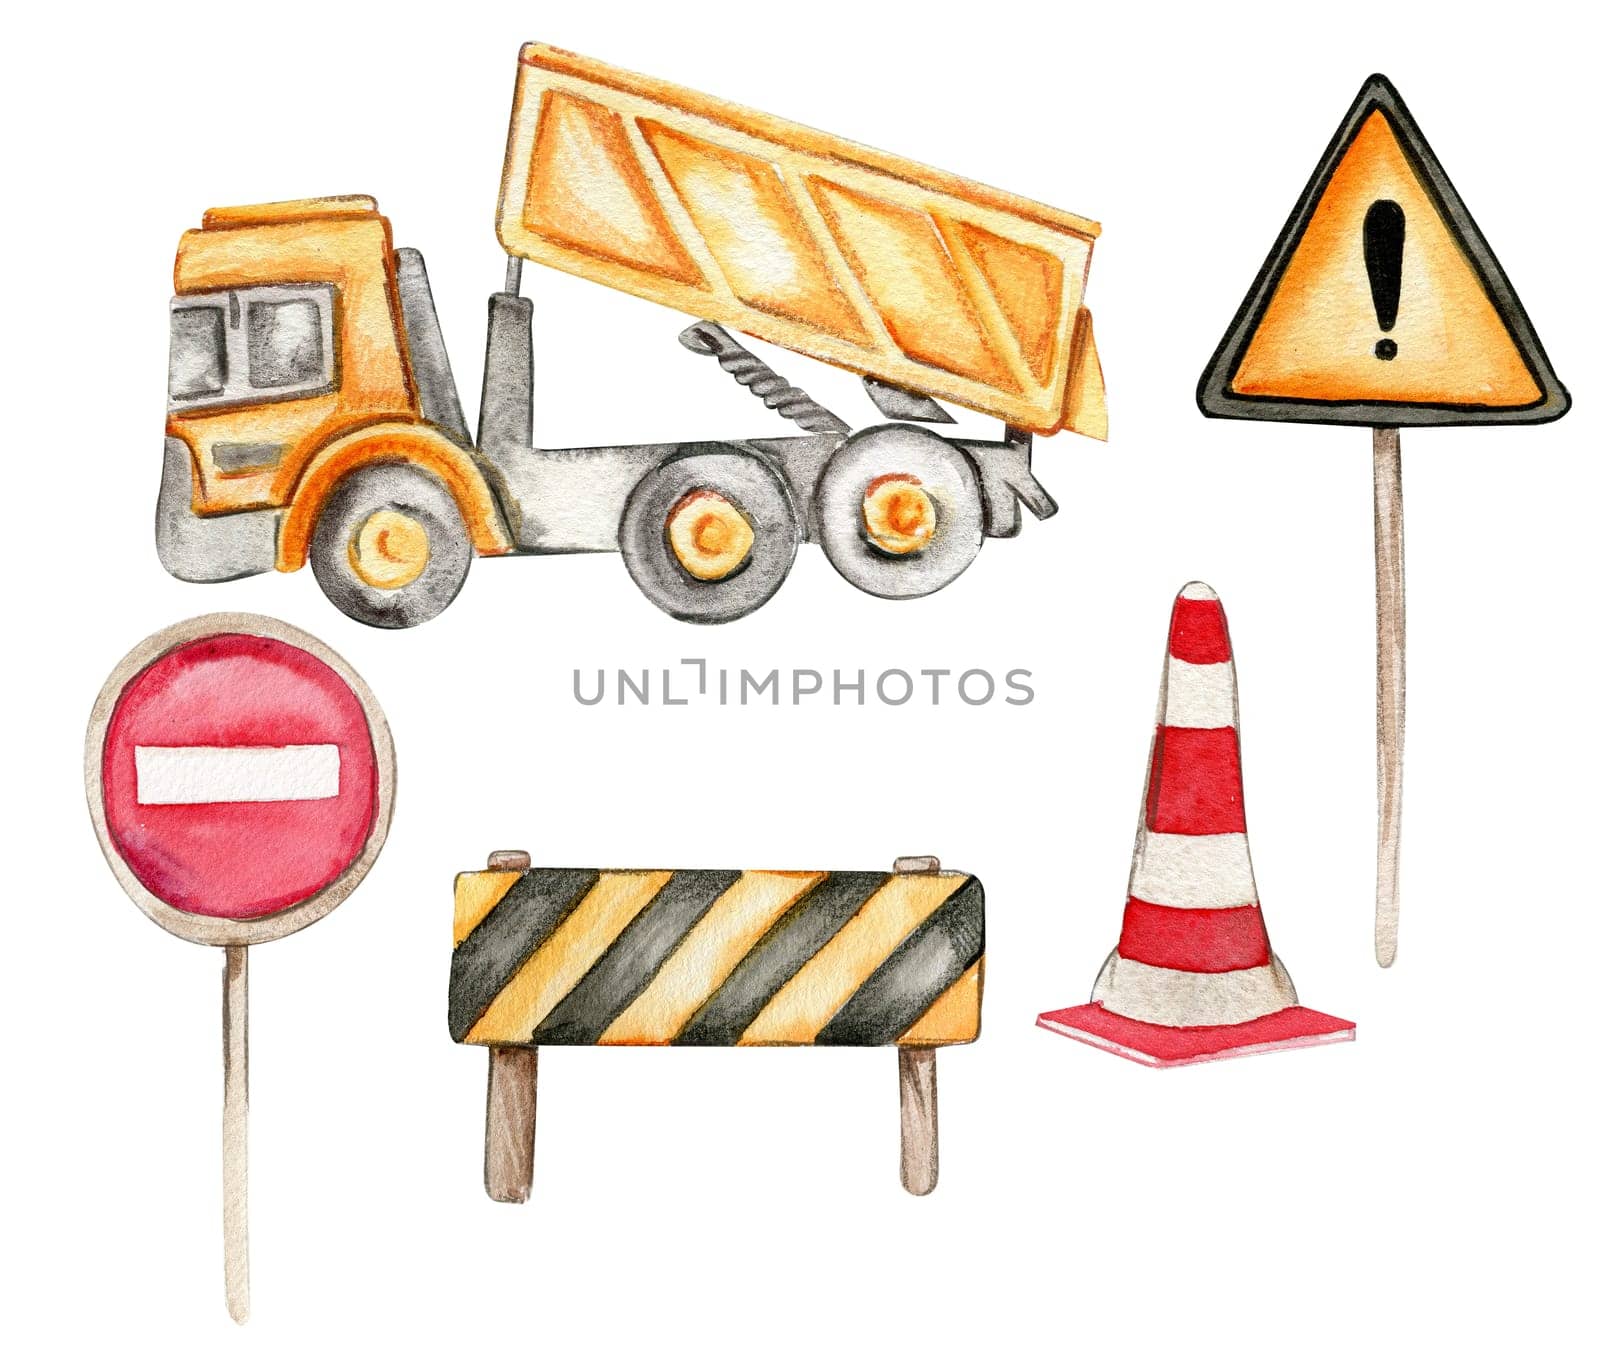 Road signs and yellow truck . Watercolor hand drawn illustration. Perfect for kid posters or stickers.